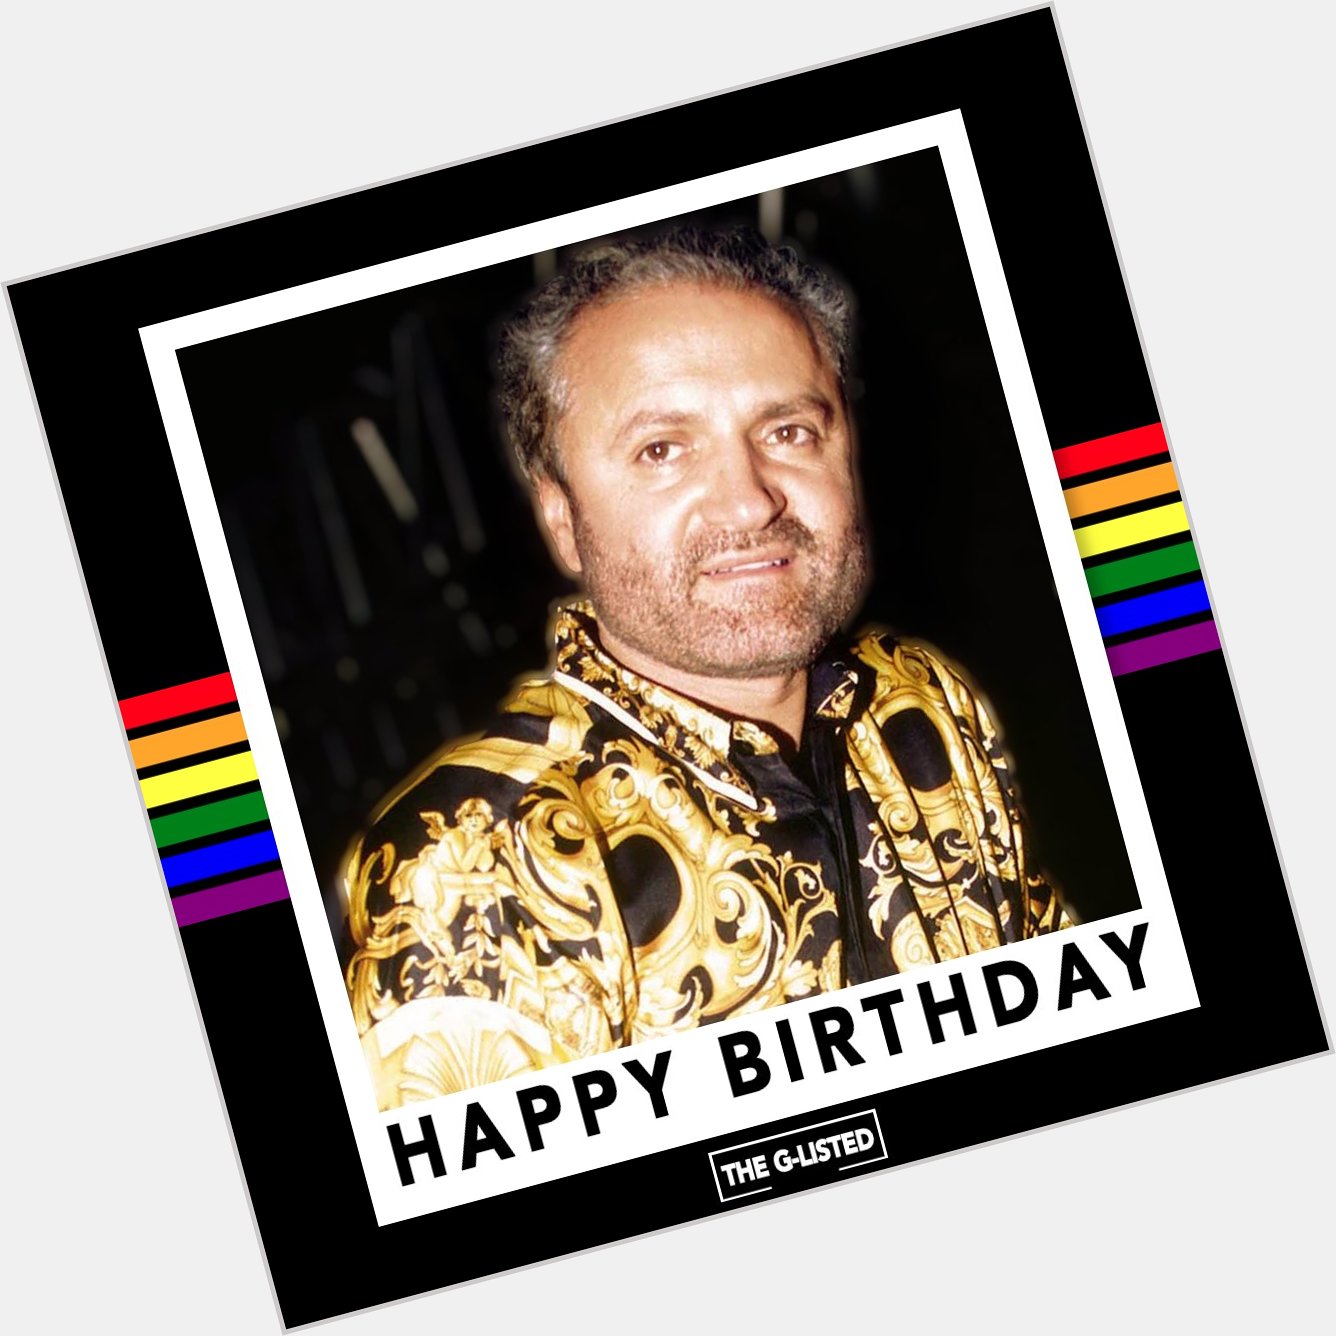 Happy birthday to the late-great legendary fashion designer Gianni Versace!!! 